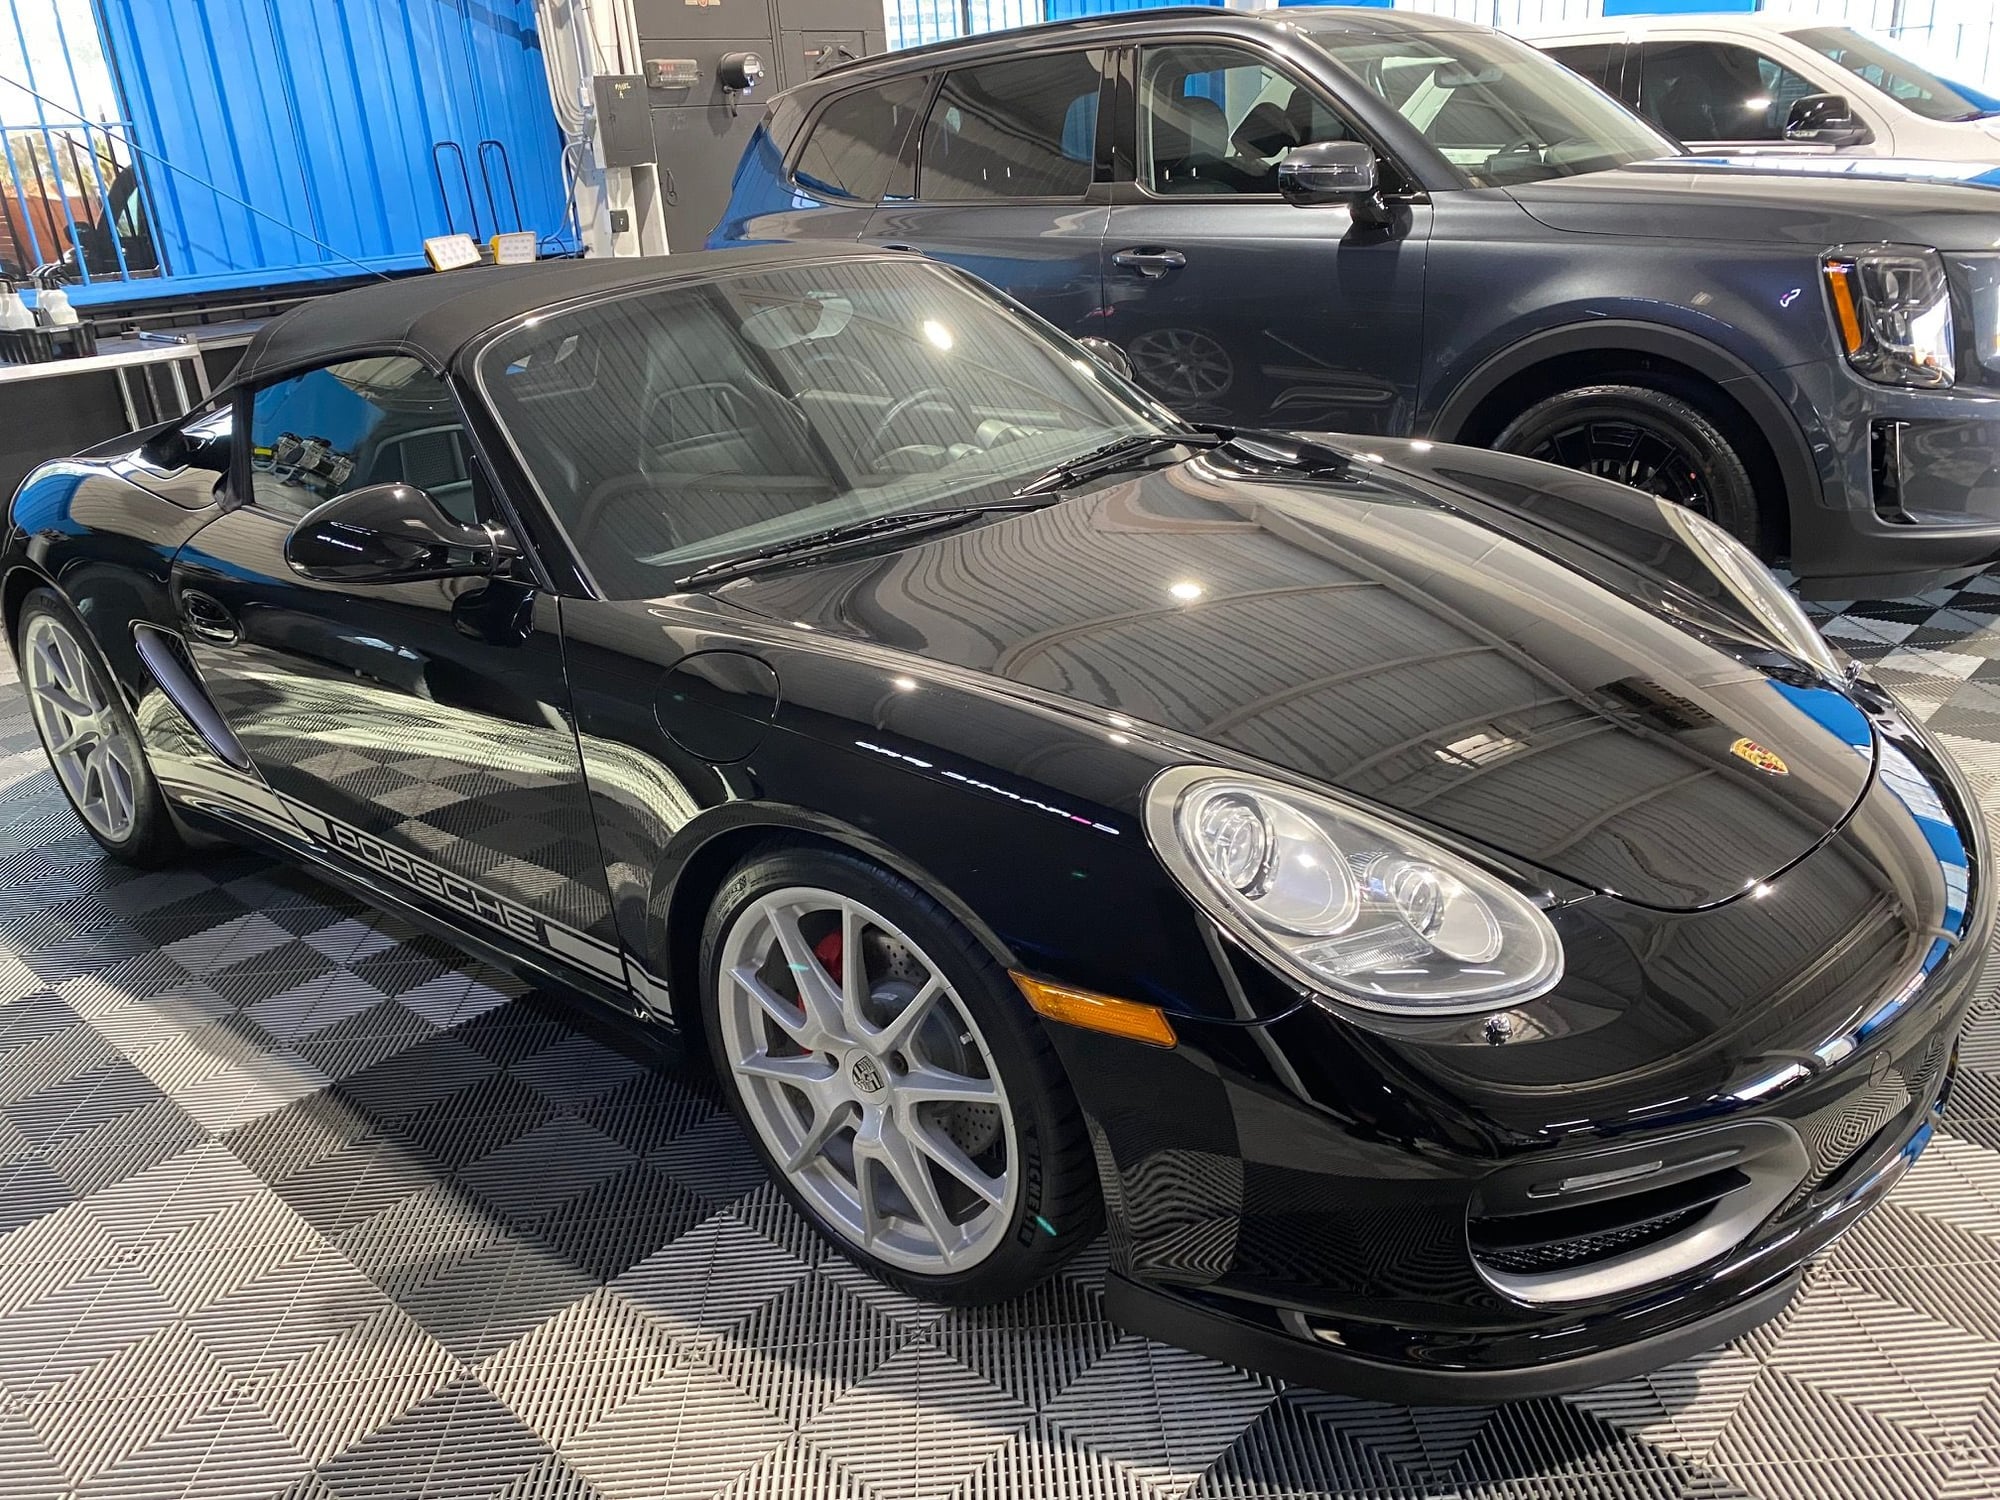 2011 Porsche Boxster - 2011 Boxster Spyder - Lightweight Special - Manual, LWB, AC delete, radio delete - Used - VIN WP0CB2A81BS745273 - 42,950 Miles - 6 cyl - 2WD - Manual - Convertible - Black - Los Angeles, CA 91356, United States